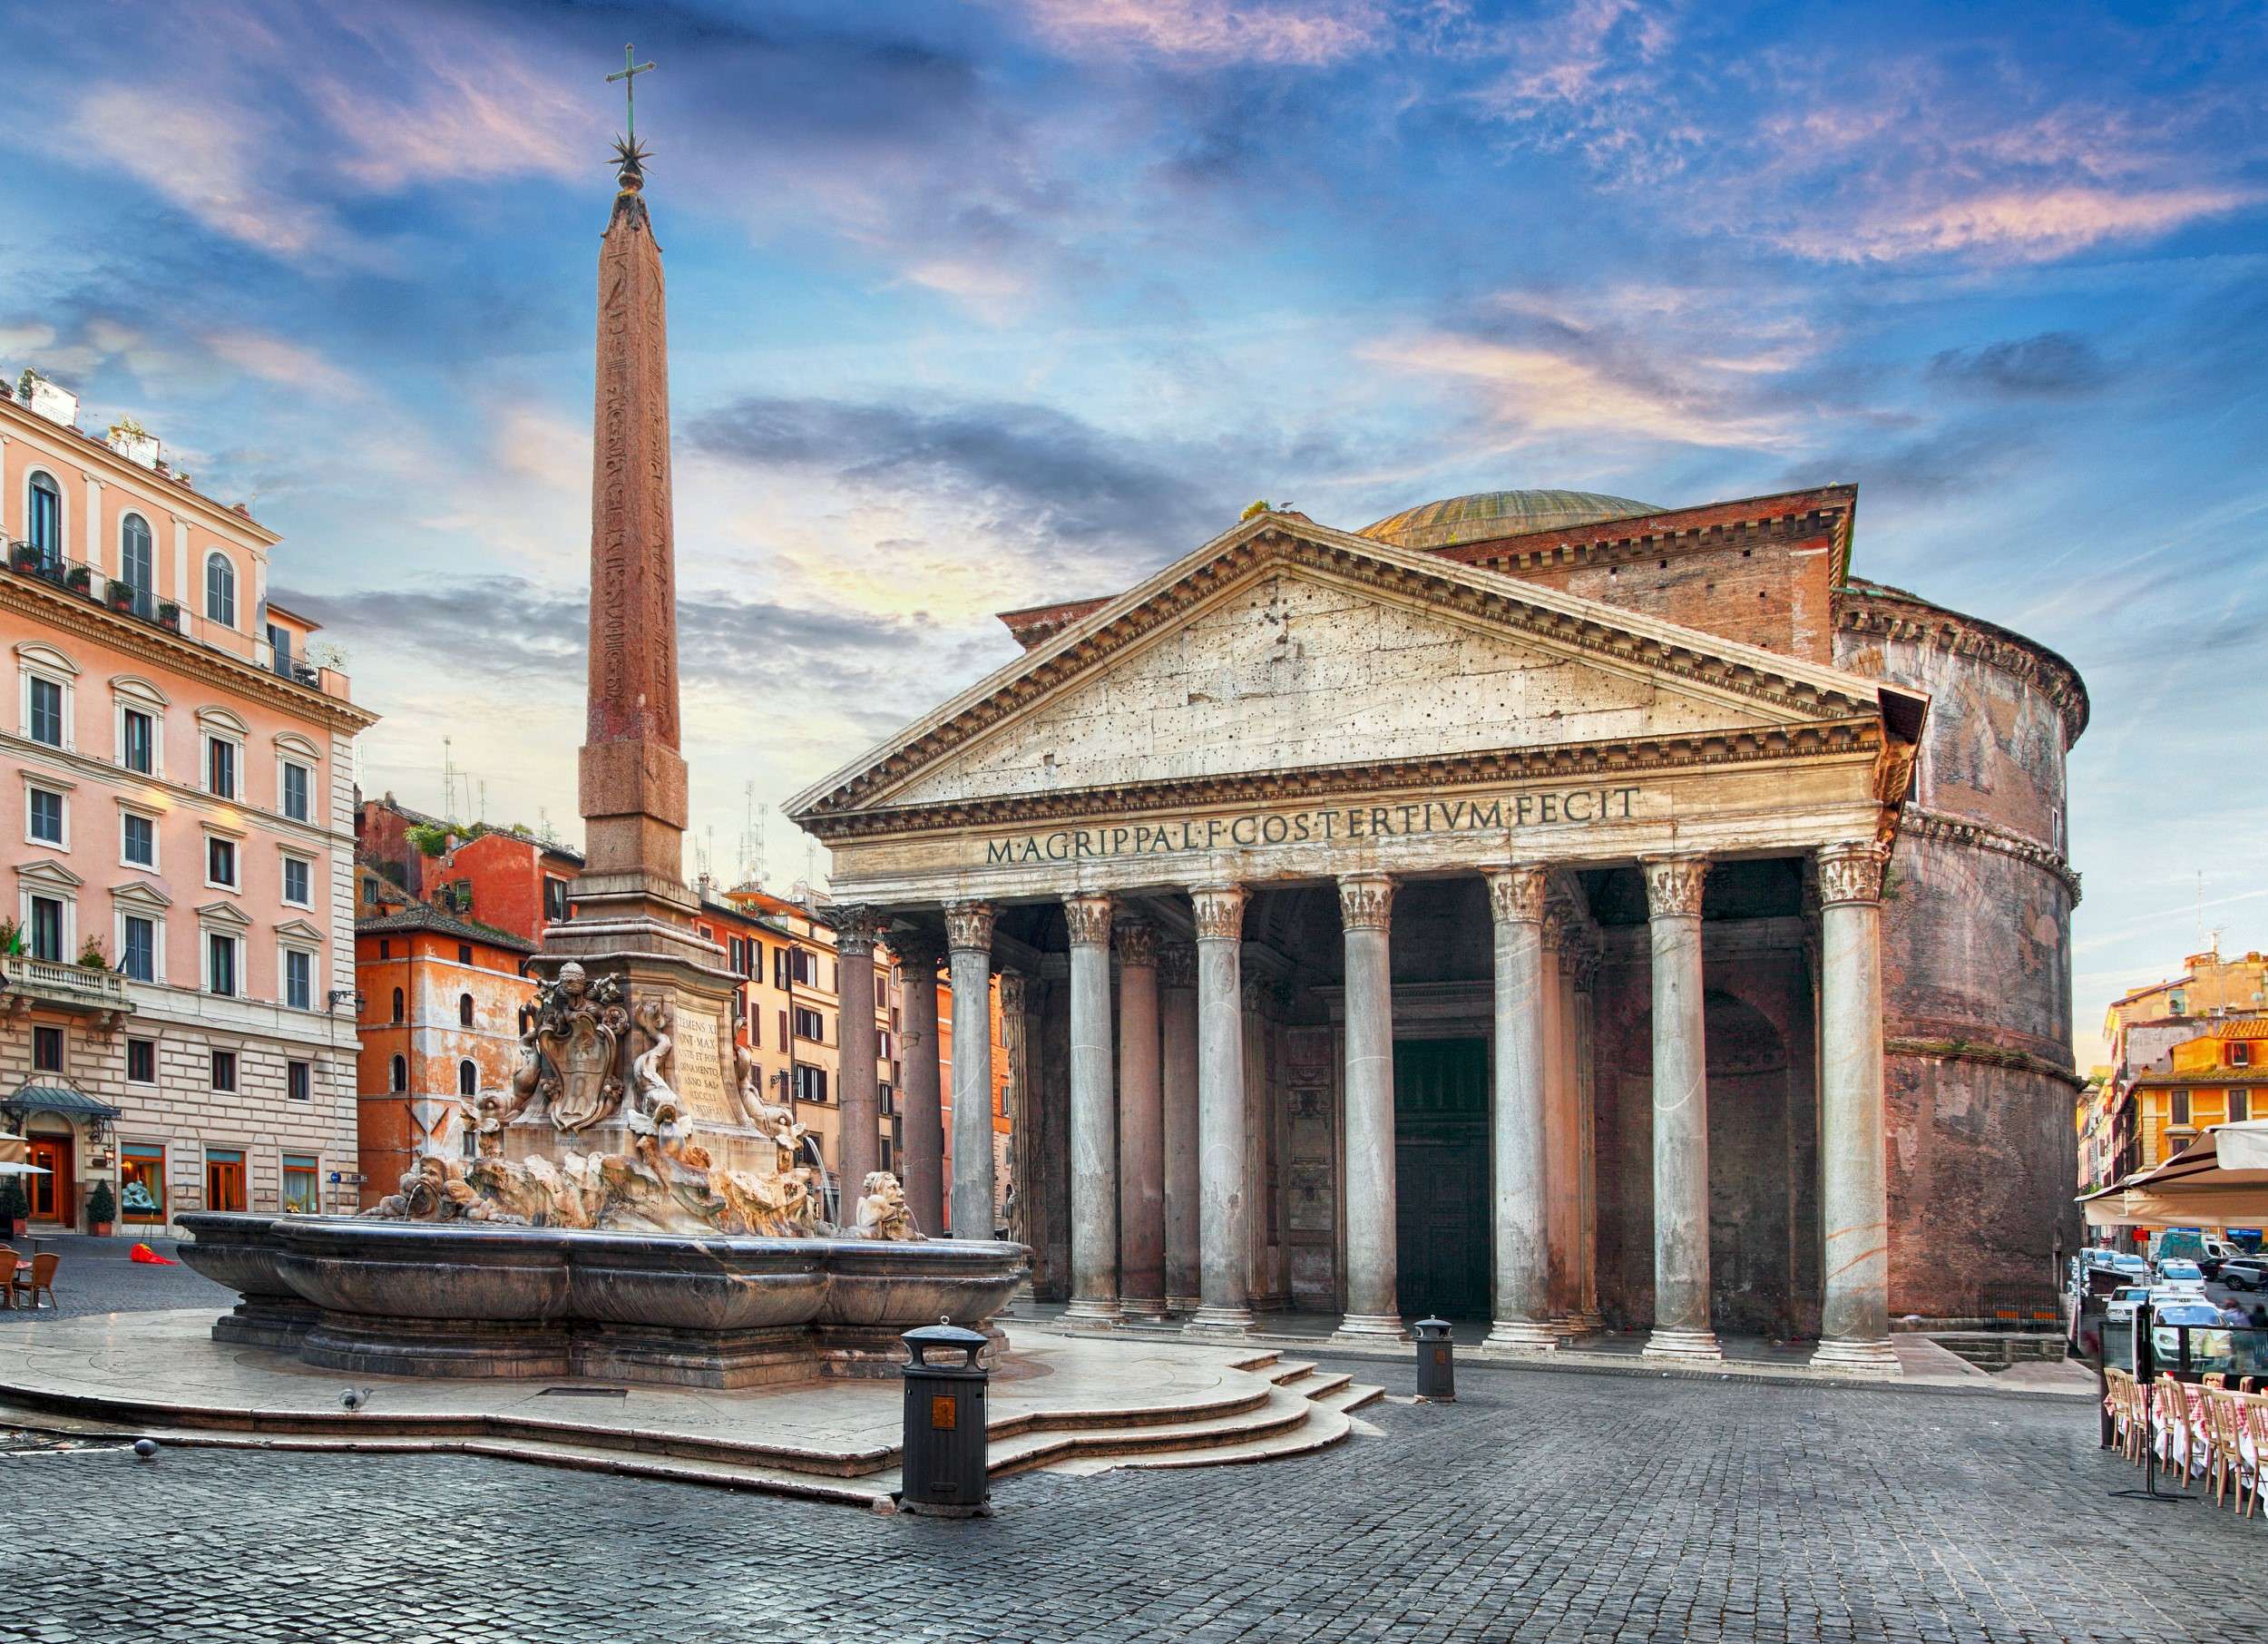 Top 10 Things to Do in Rome- Marvel at The Pantheon